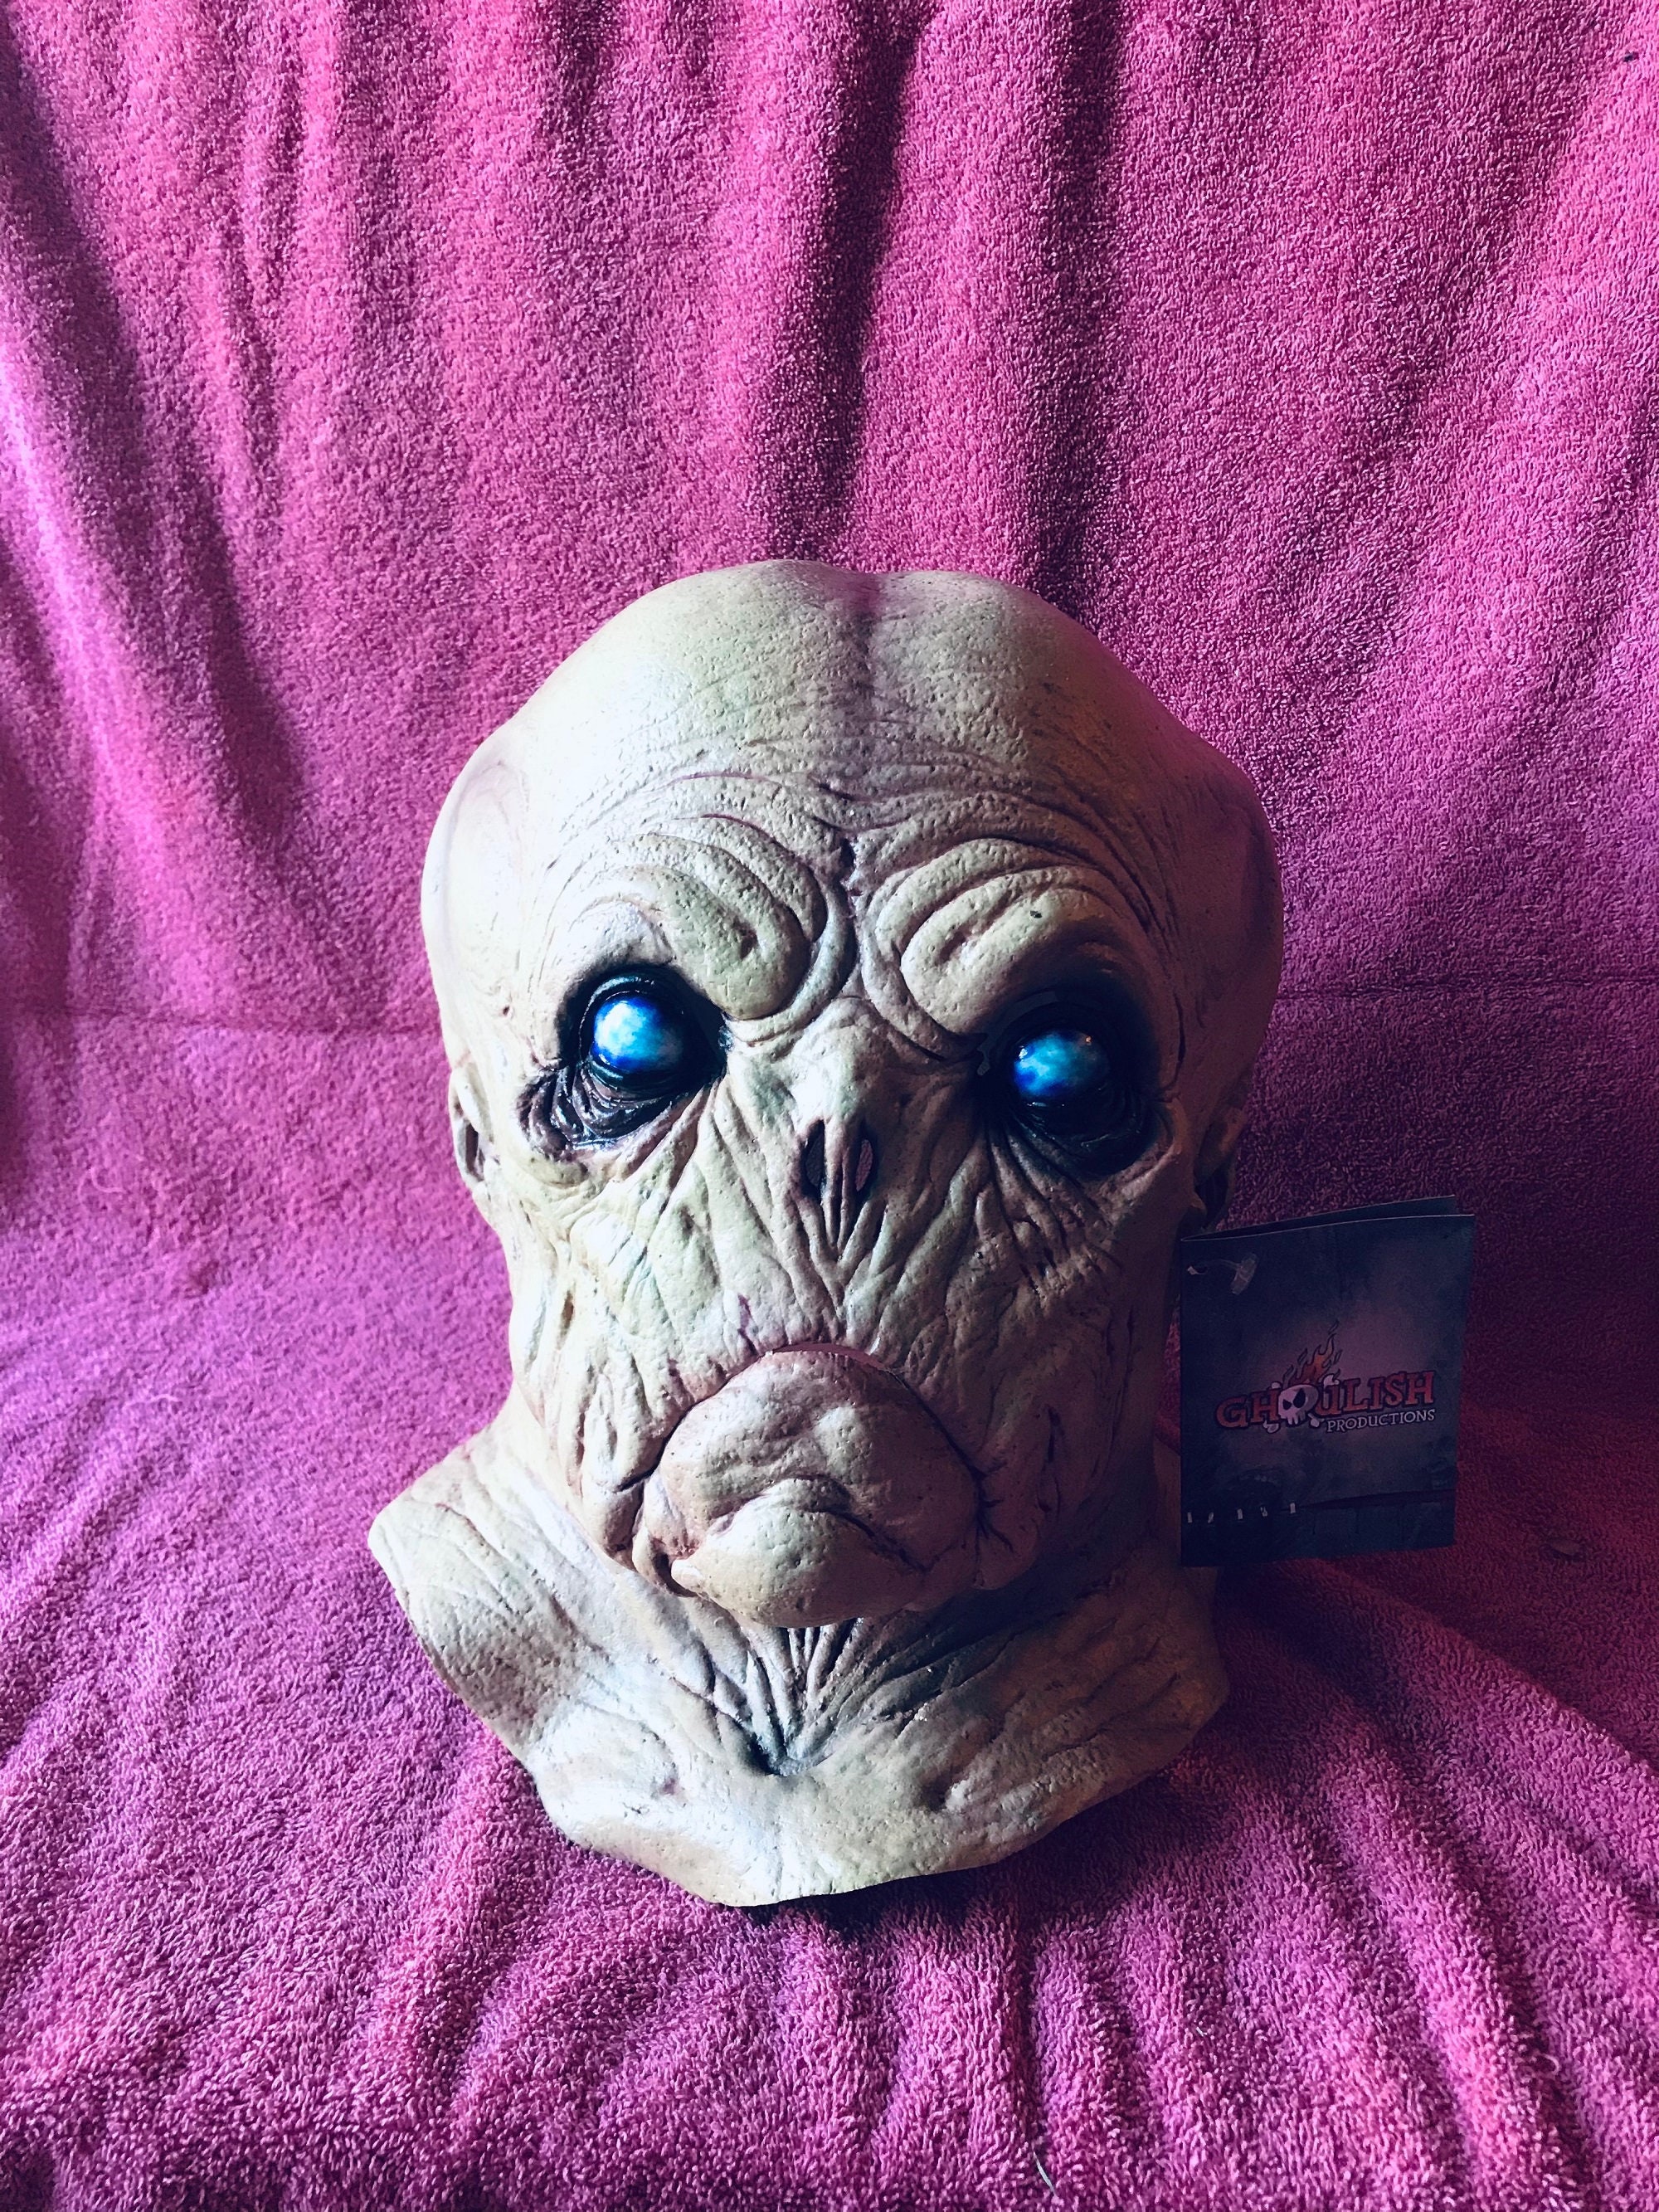 On Sale 30% off New AREA 51 ALIEN Latex Deluxe Mask Free Shipping Item is A  Item Can Be Repainted, Redesigned or Rehauled. 